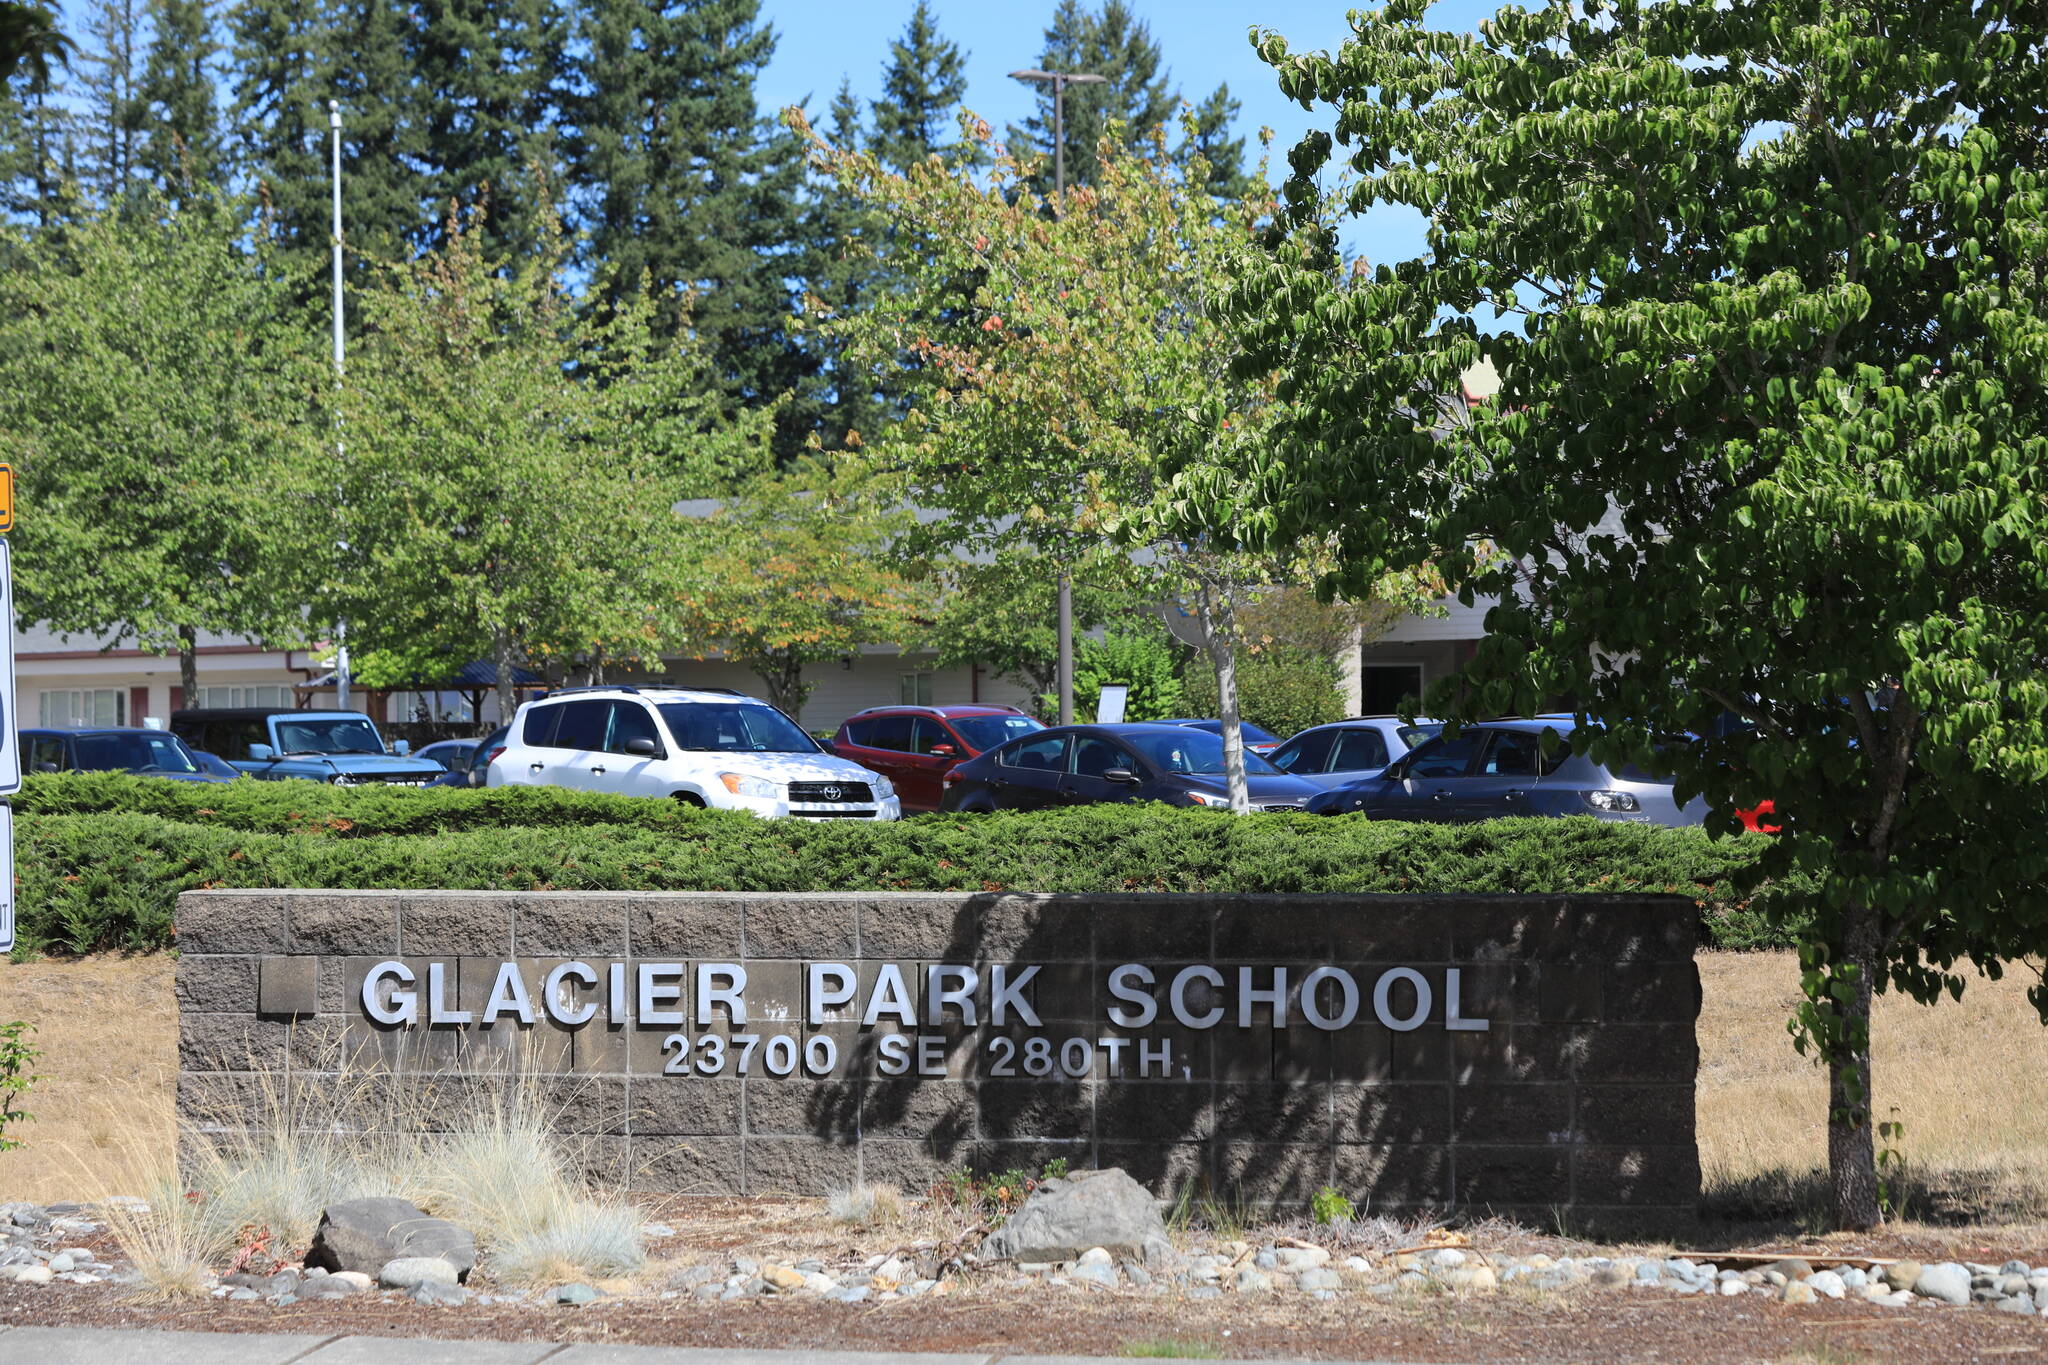 Bryan Neyers worked at Glacier Park Elementary School (pictured here) for several years as a paraeducator, supervising kids at recess and in child care programs. Despite co-workers approaching school and district administrators about Neyers’ close relationships with students, Neyers continued working with kids. He now awaits trial on Sept. 5 on charges of molesting and raping young boys in his care. (Photo by Scott Eklund/Red Box Pictures)